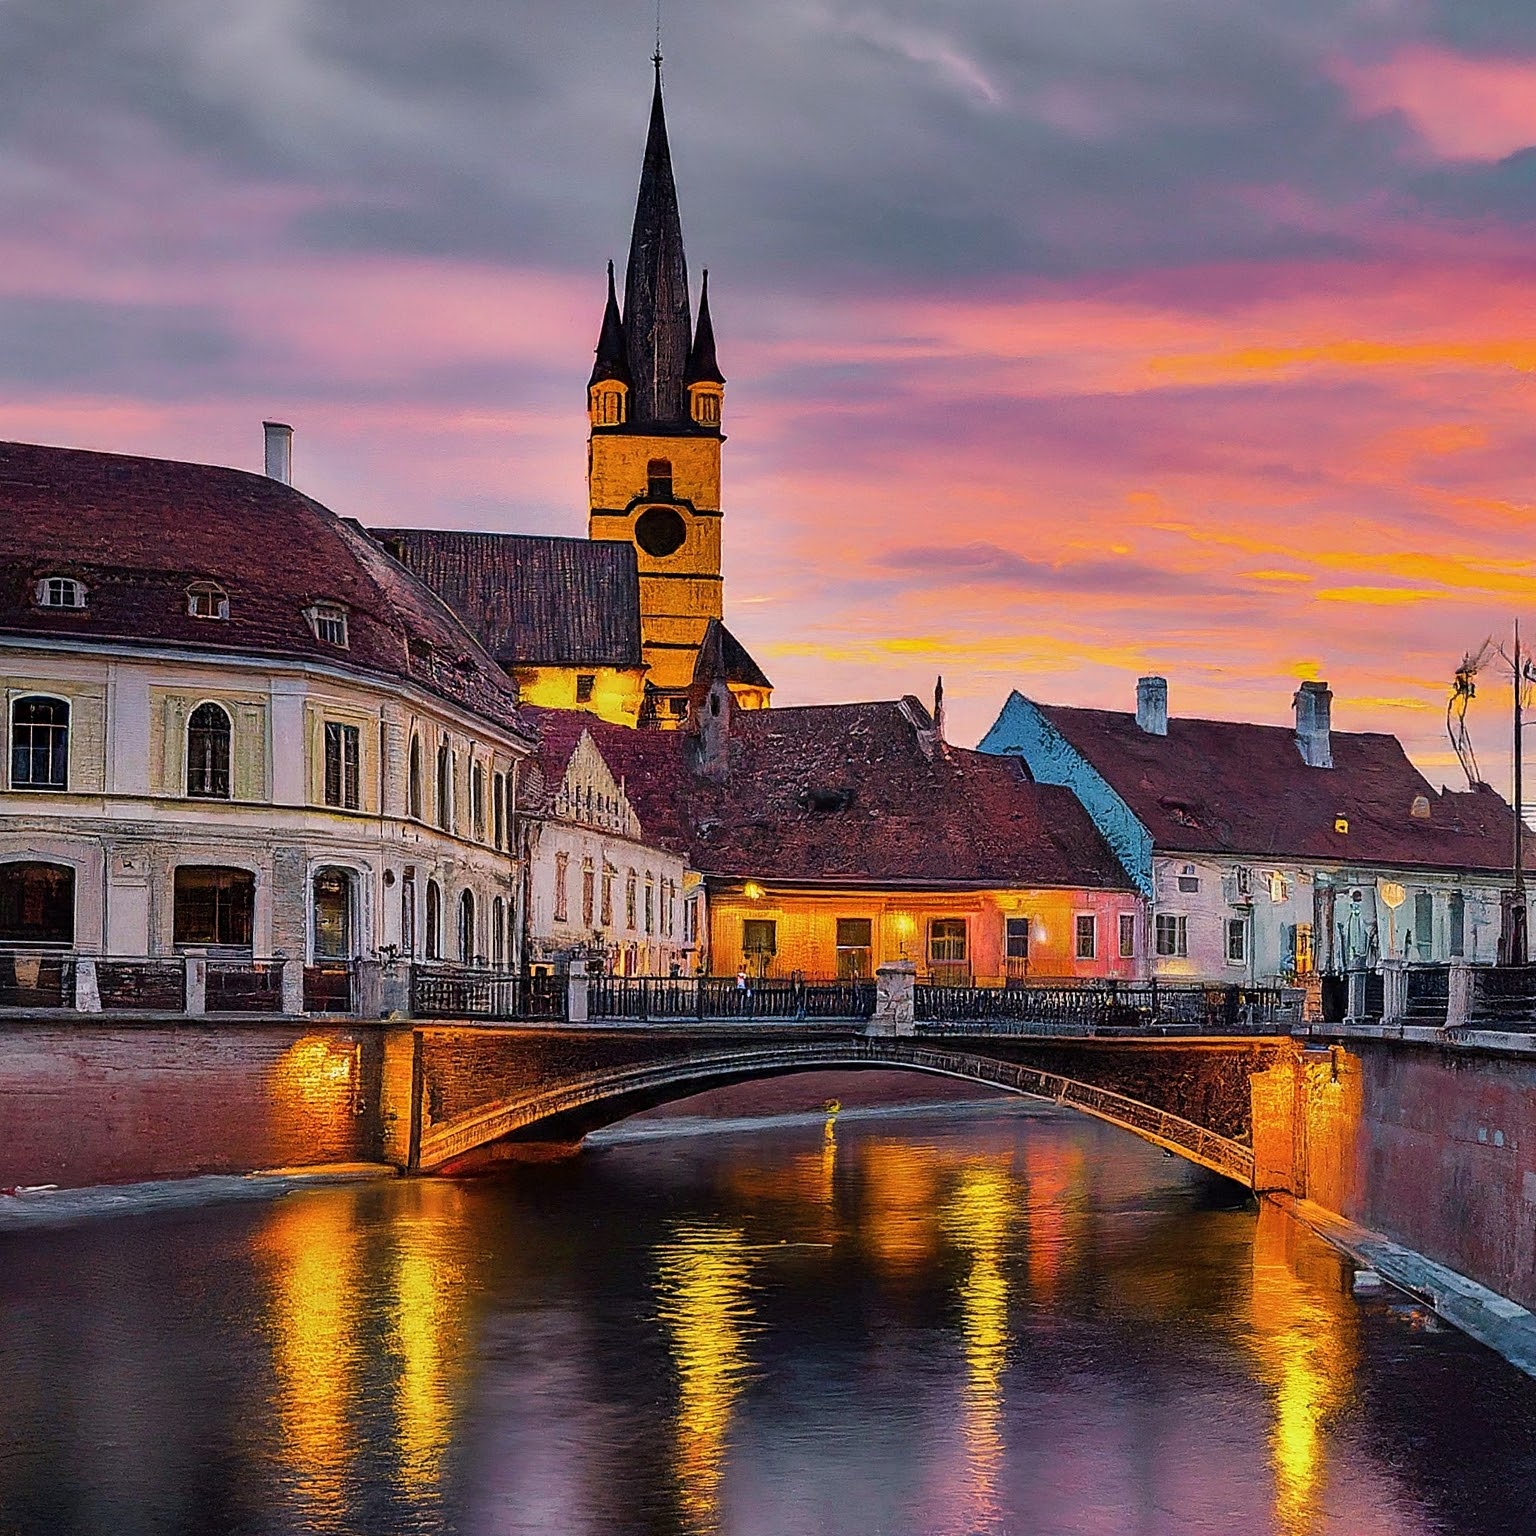 Bridge of Lies in Sibiu, Romania, at dusk with colorful sunset.